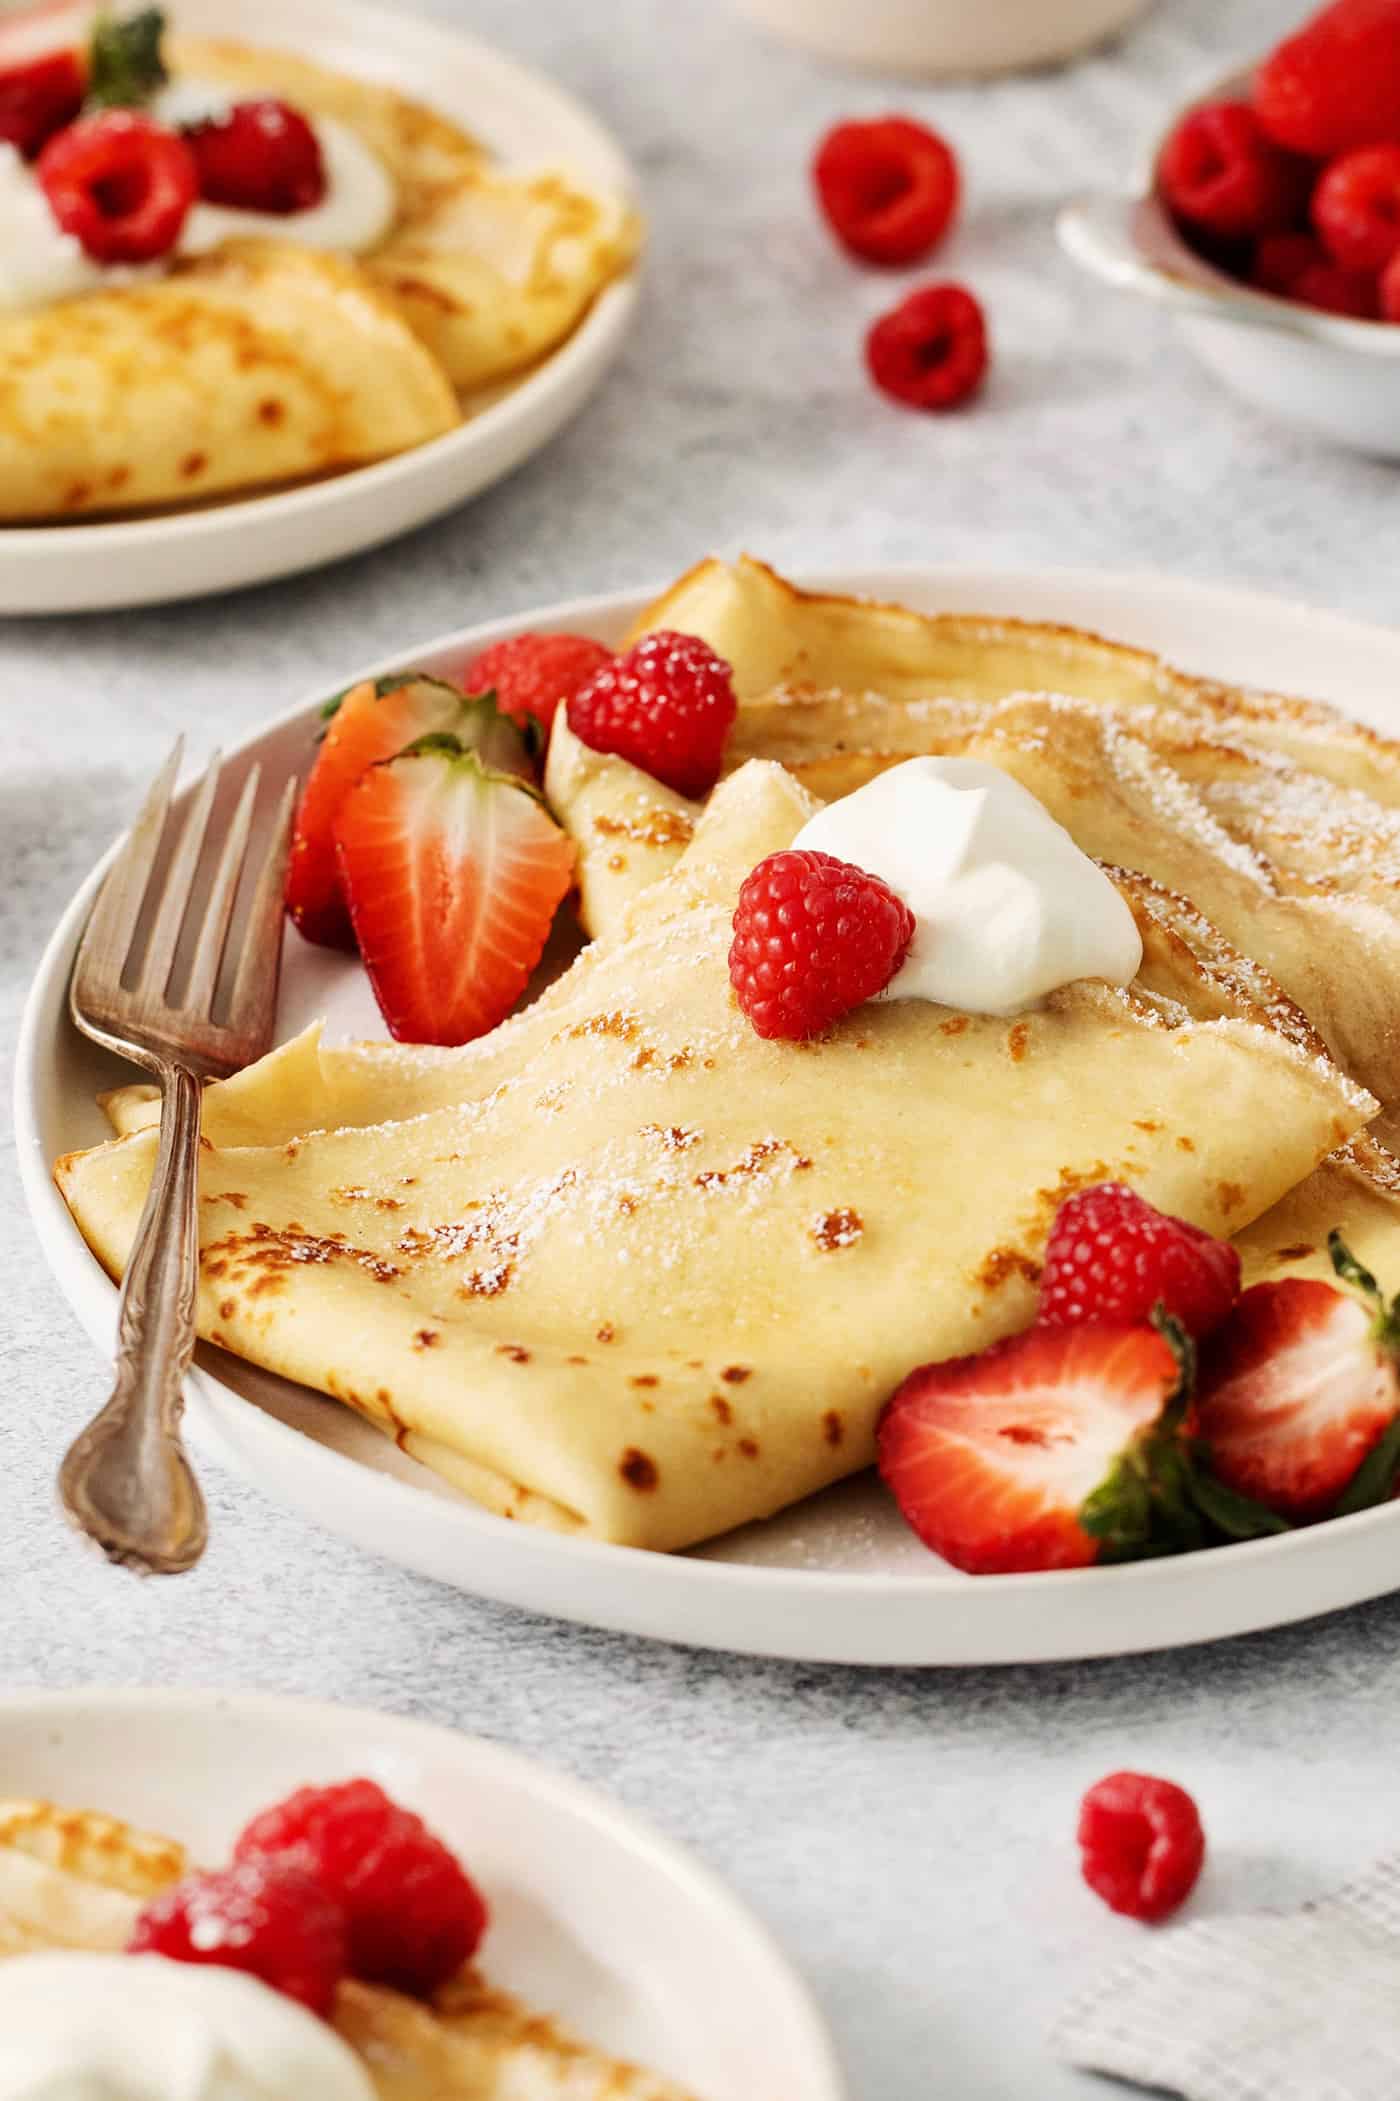 A plate of French crepes topped with strawberries on a table.